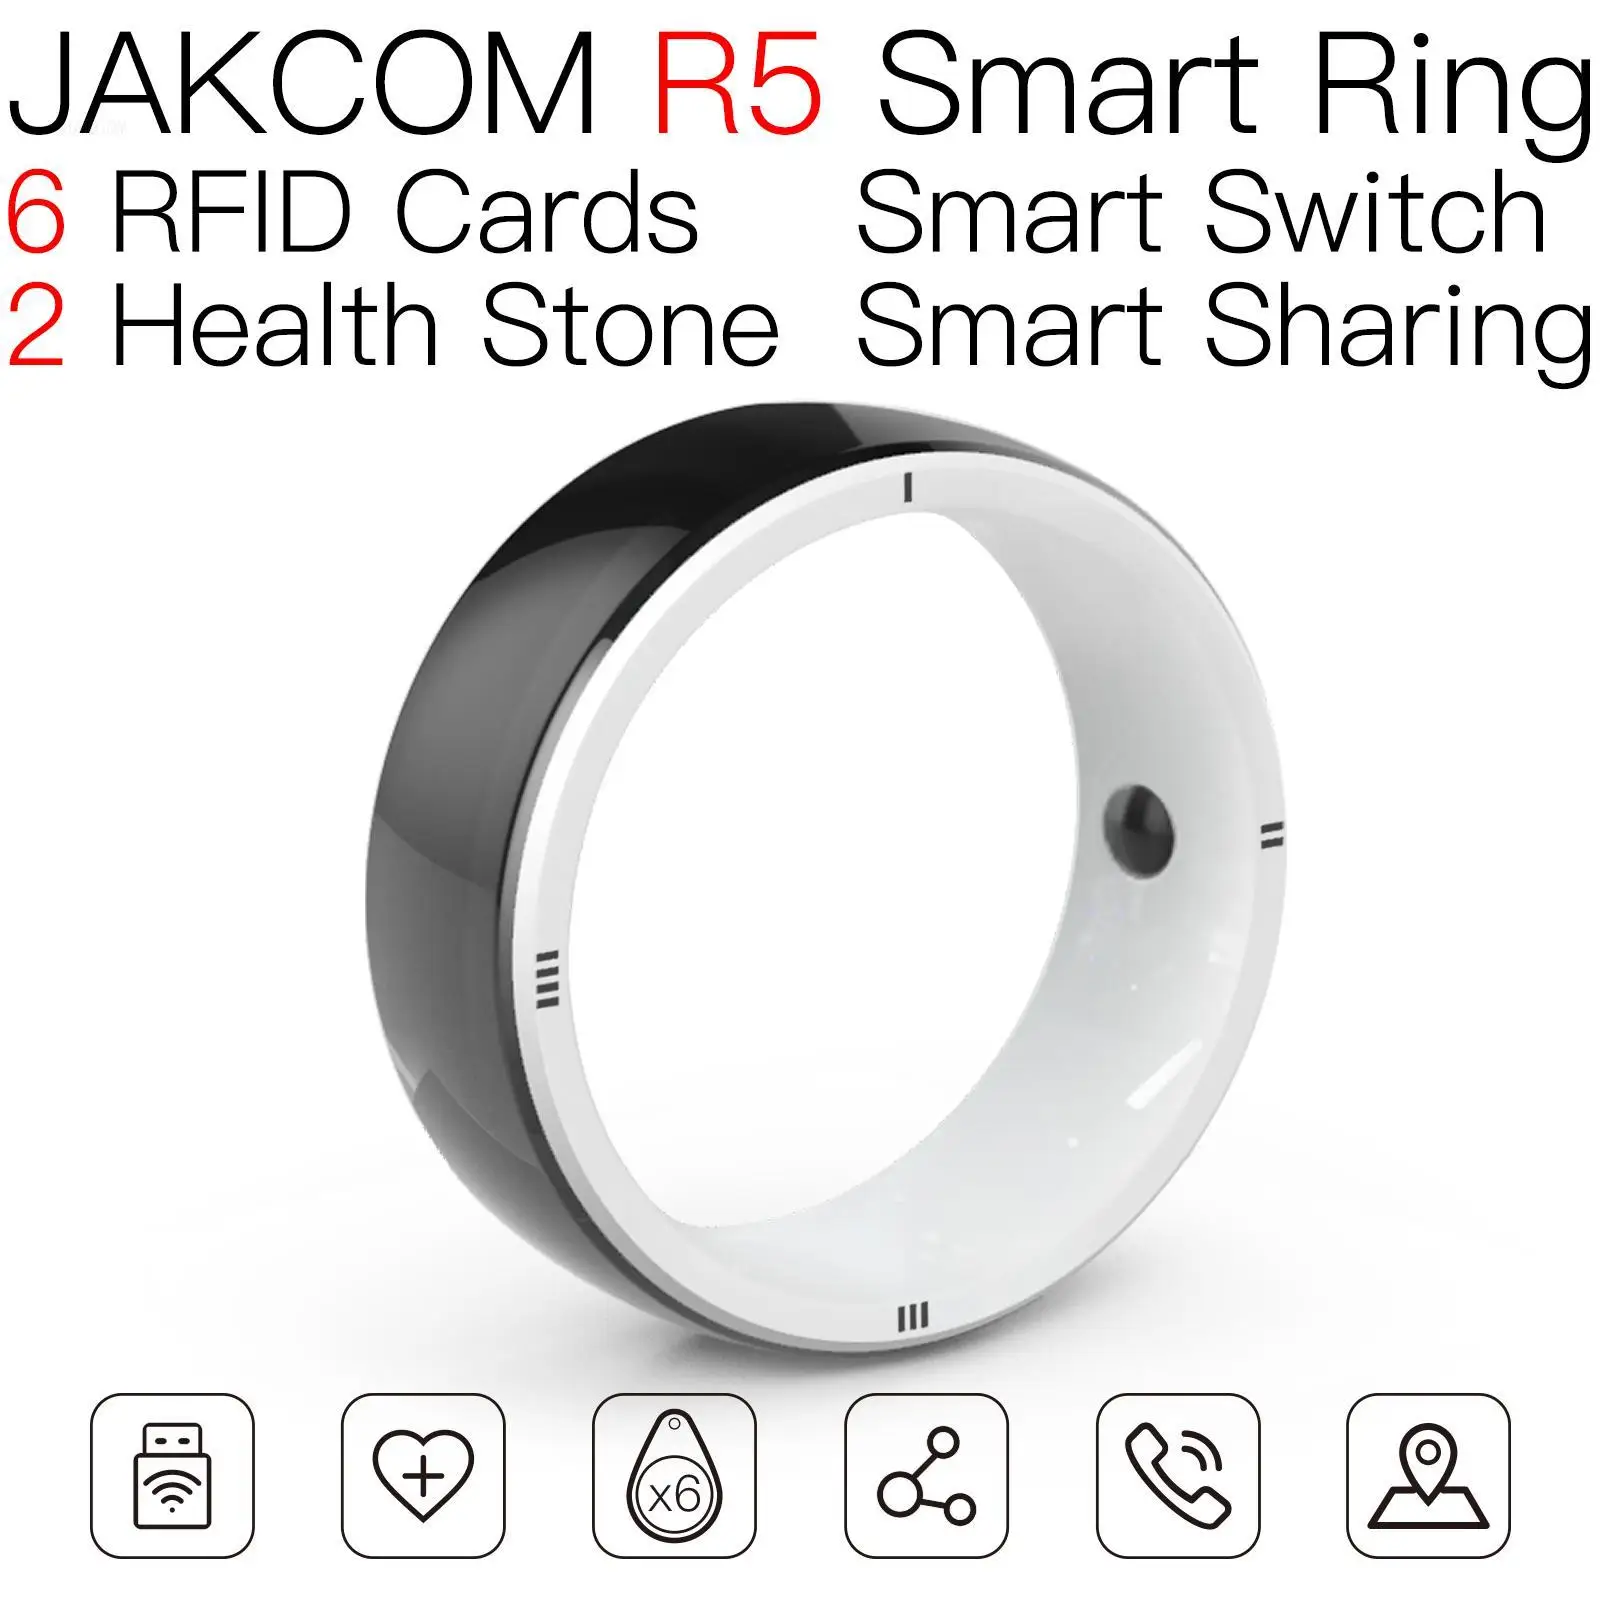 

JAKCOM R5 Smart Ring For men women code rfid 125 khz coil tag nfc business card plastic packing 12 months industrial tags